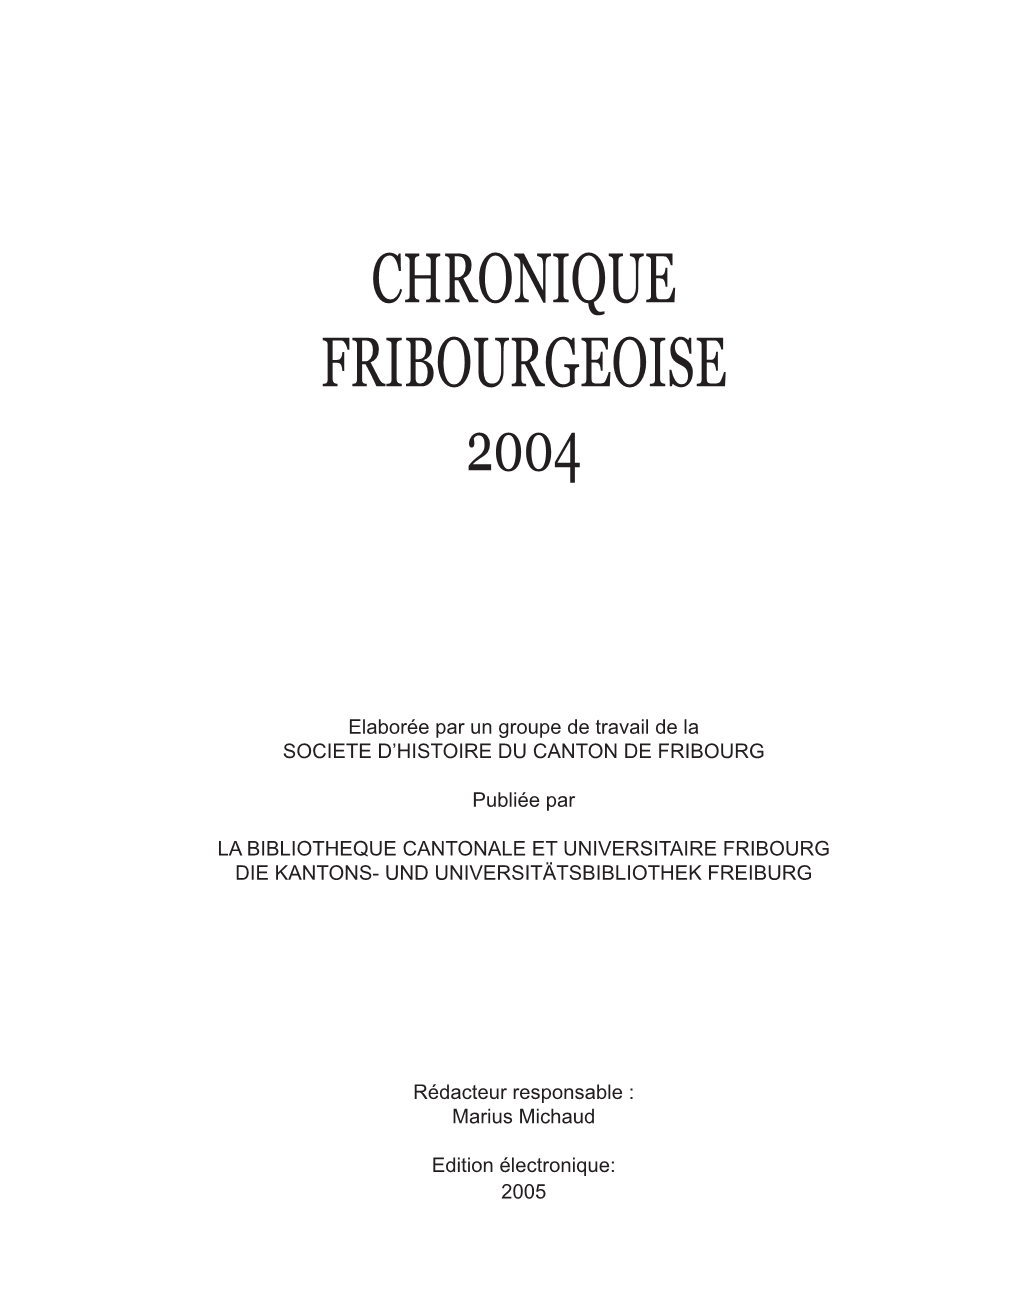 Chronique Fribourgeoise 2004